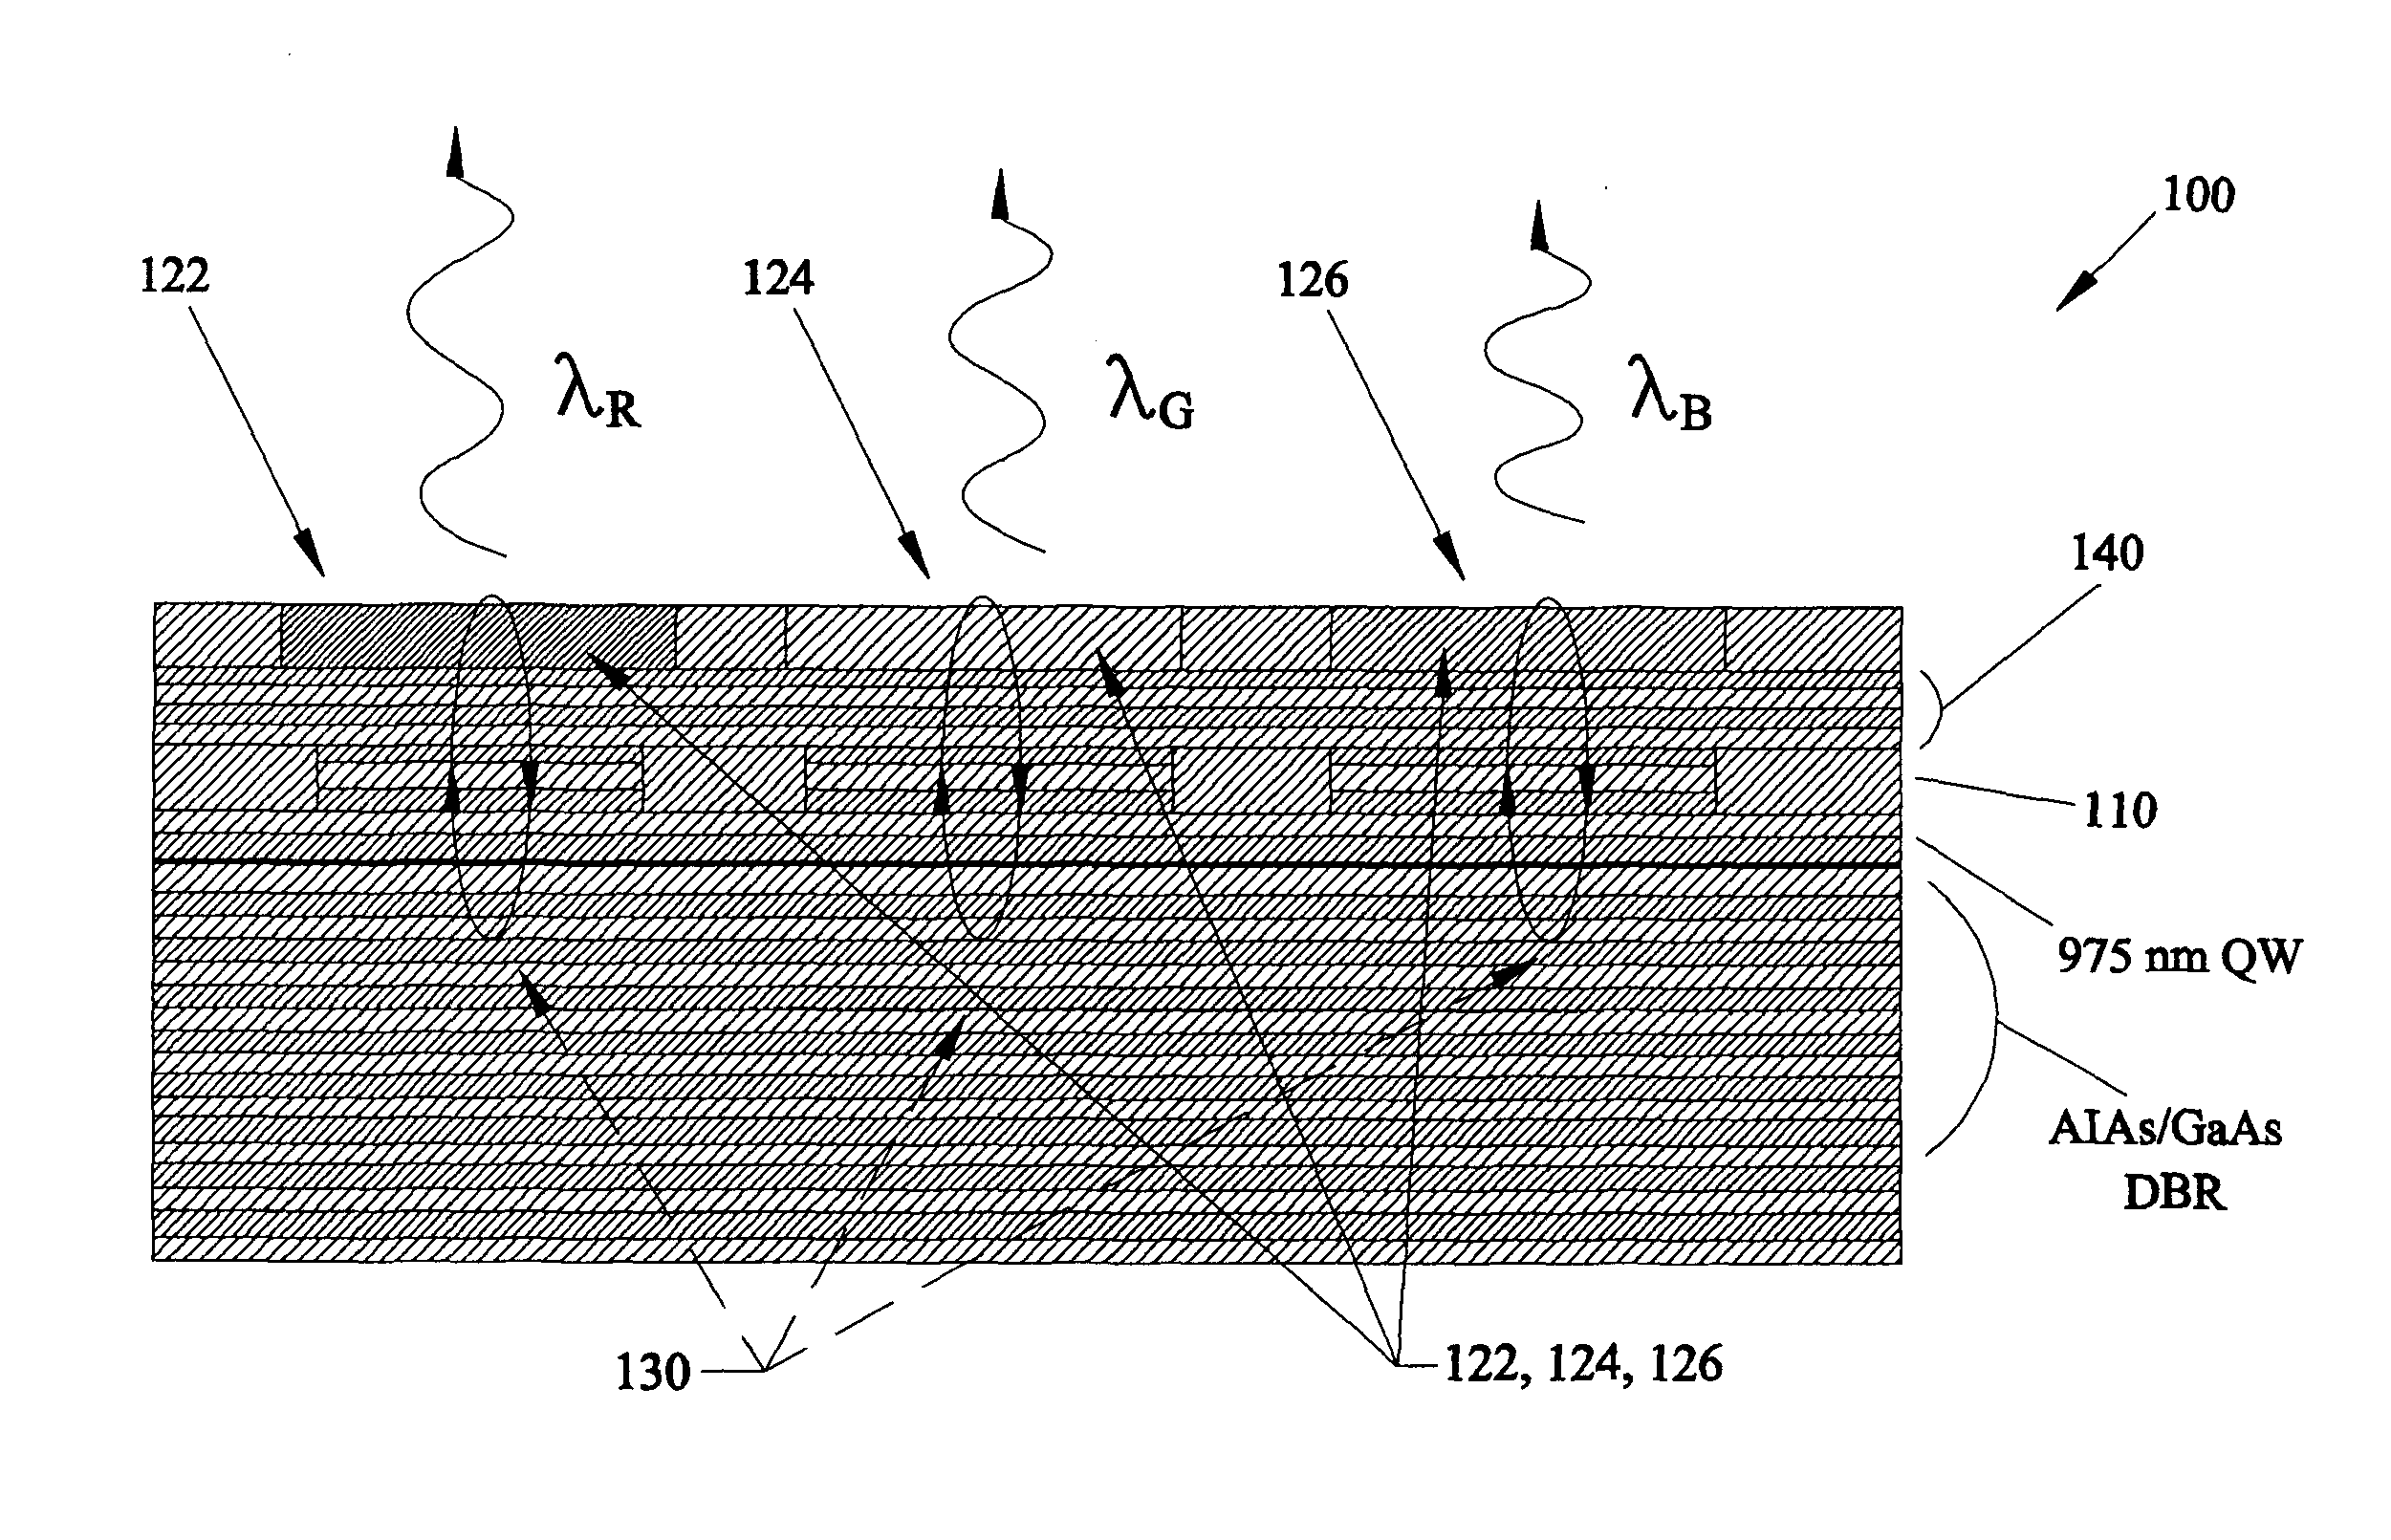 Low voltage display or indicator system employing combinations of up converters and semiconductor light sources